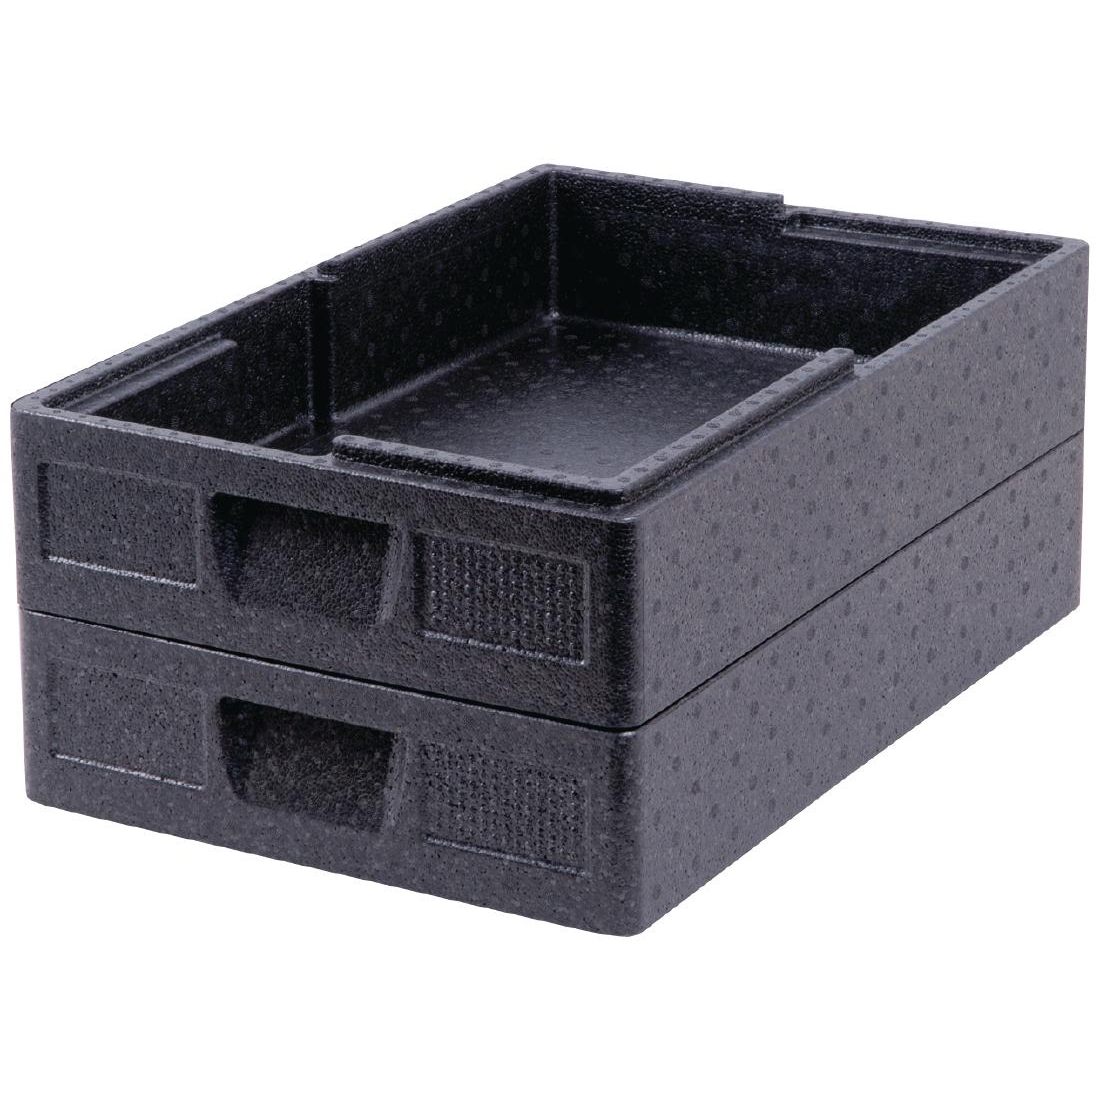 dl993_y_2_thermobox-stacking